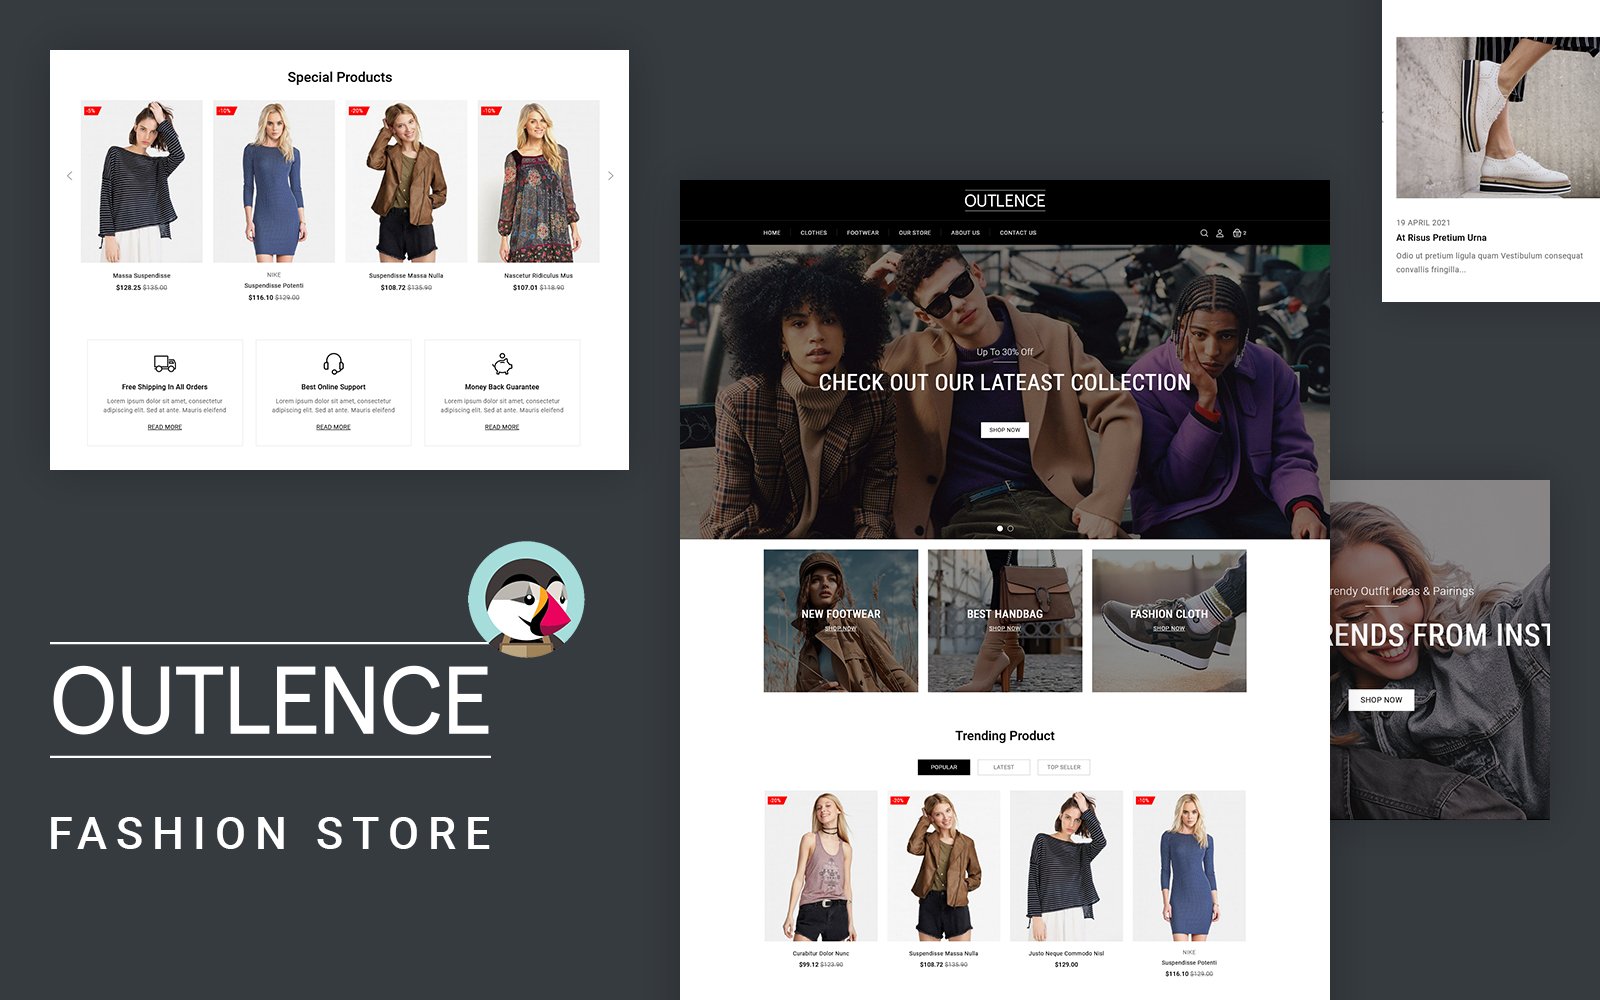 OutLence - Awesome Fashion and Accessories PrestaShop Theme